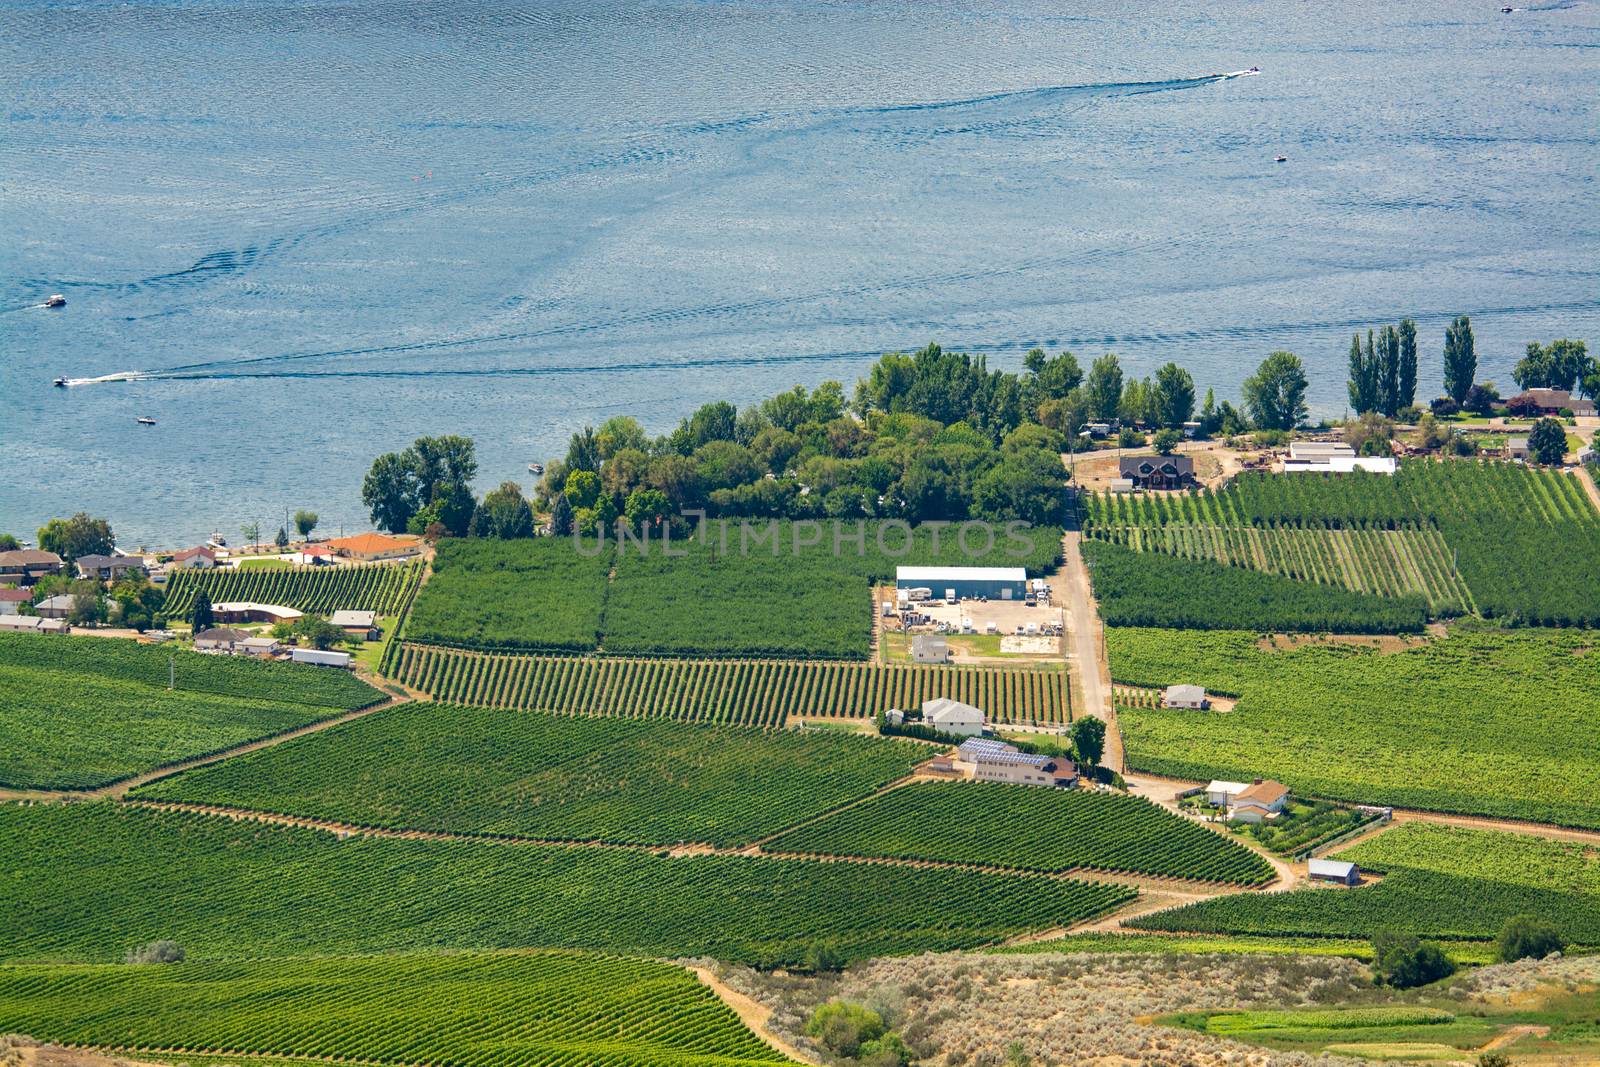 Landscape overview with farmer's land and houses at Okanagan lake on summer day